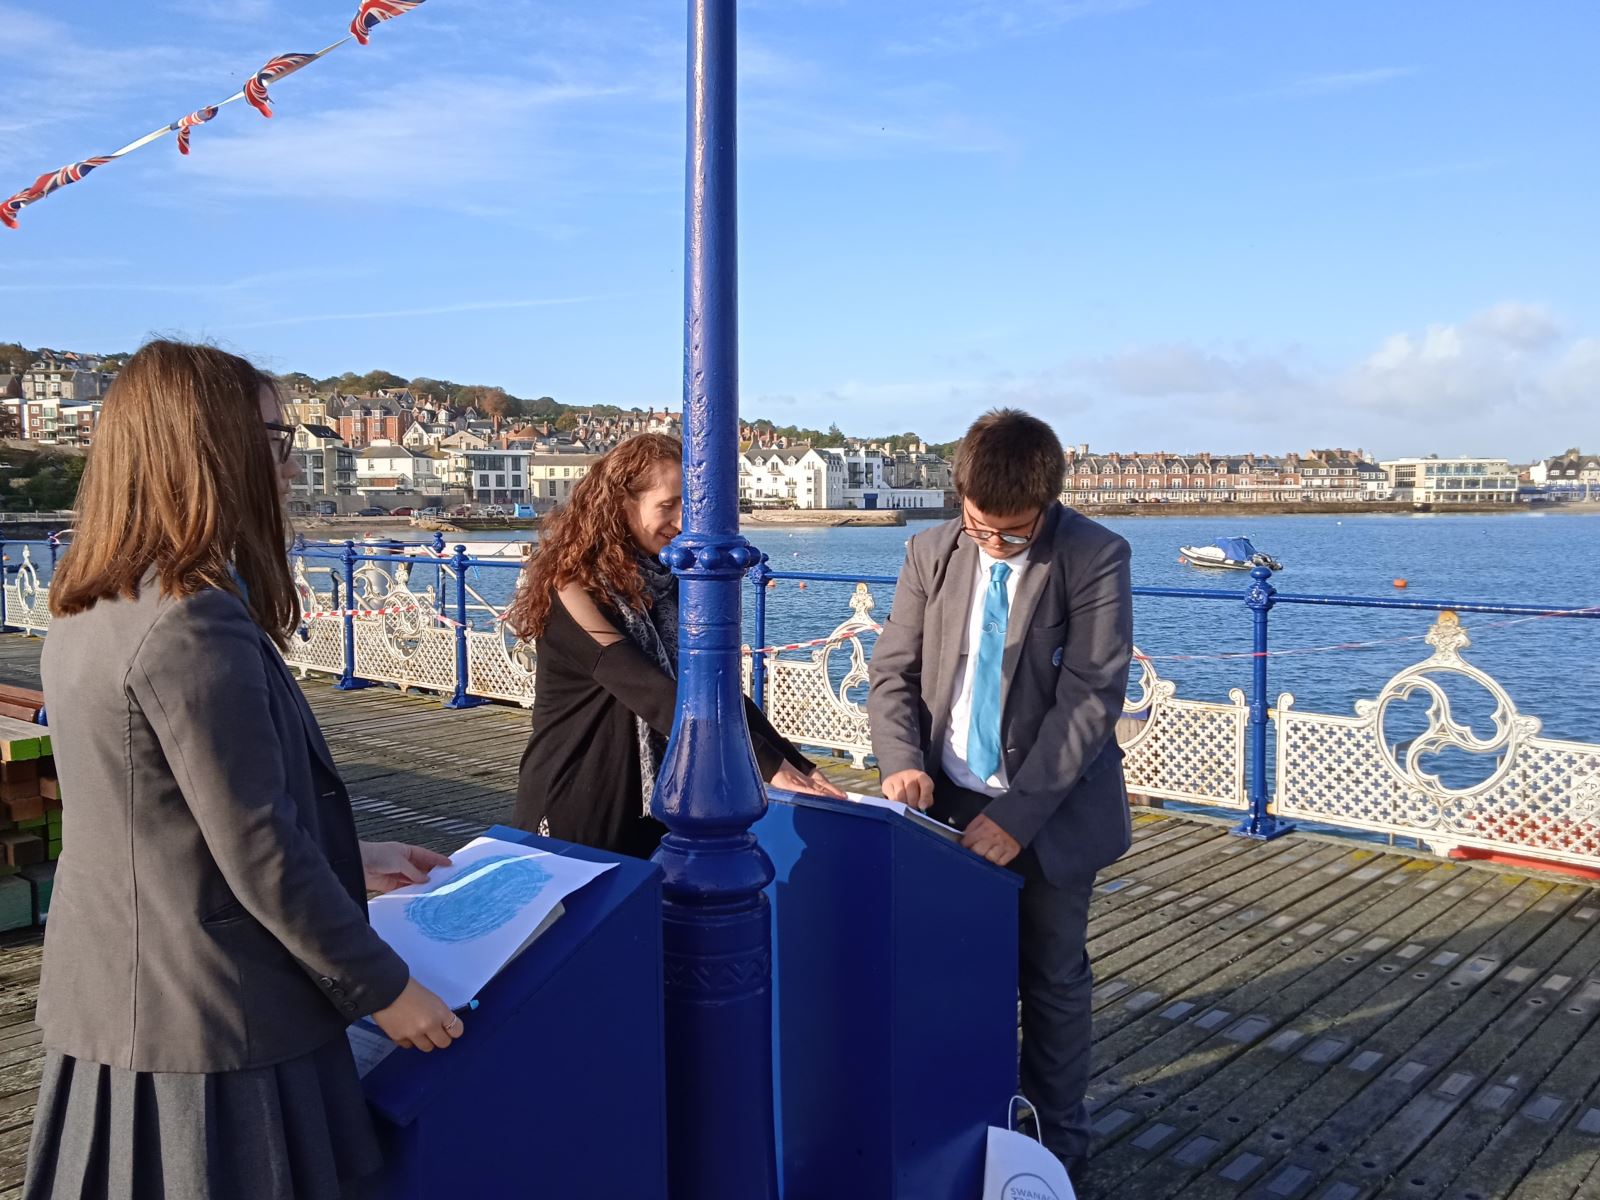 Two students and one adult do stone carving rubbings on Swanage Pier